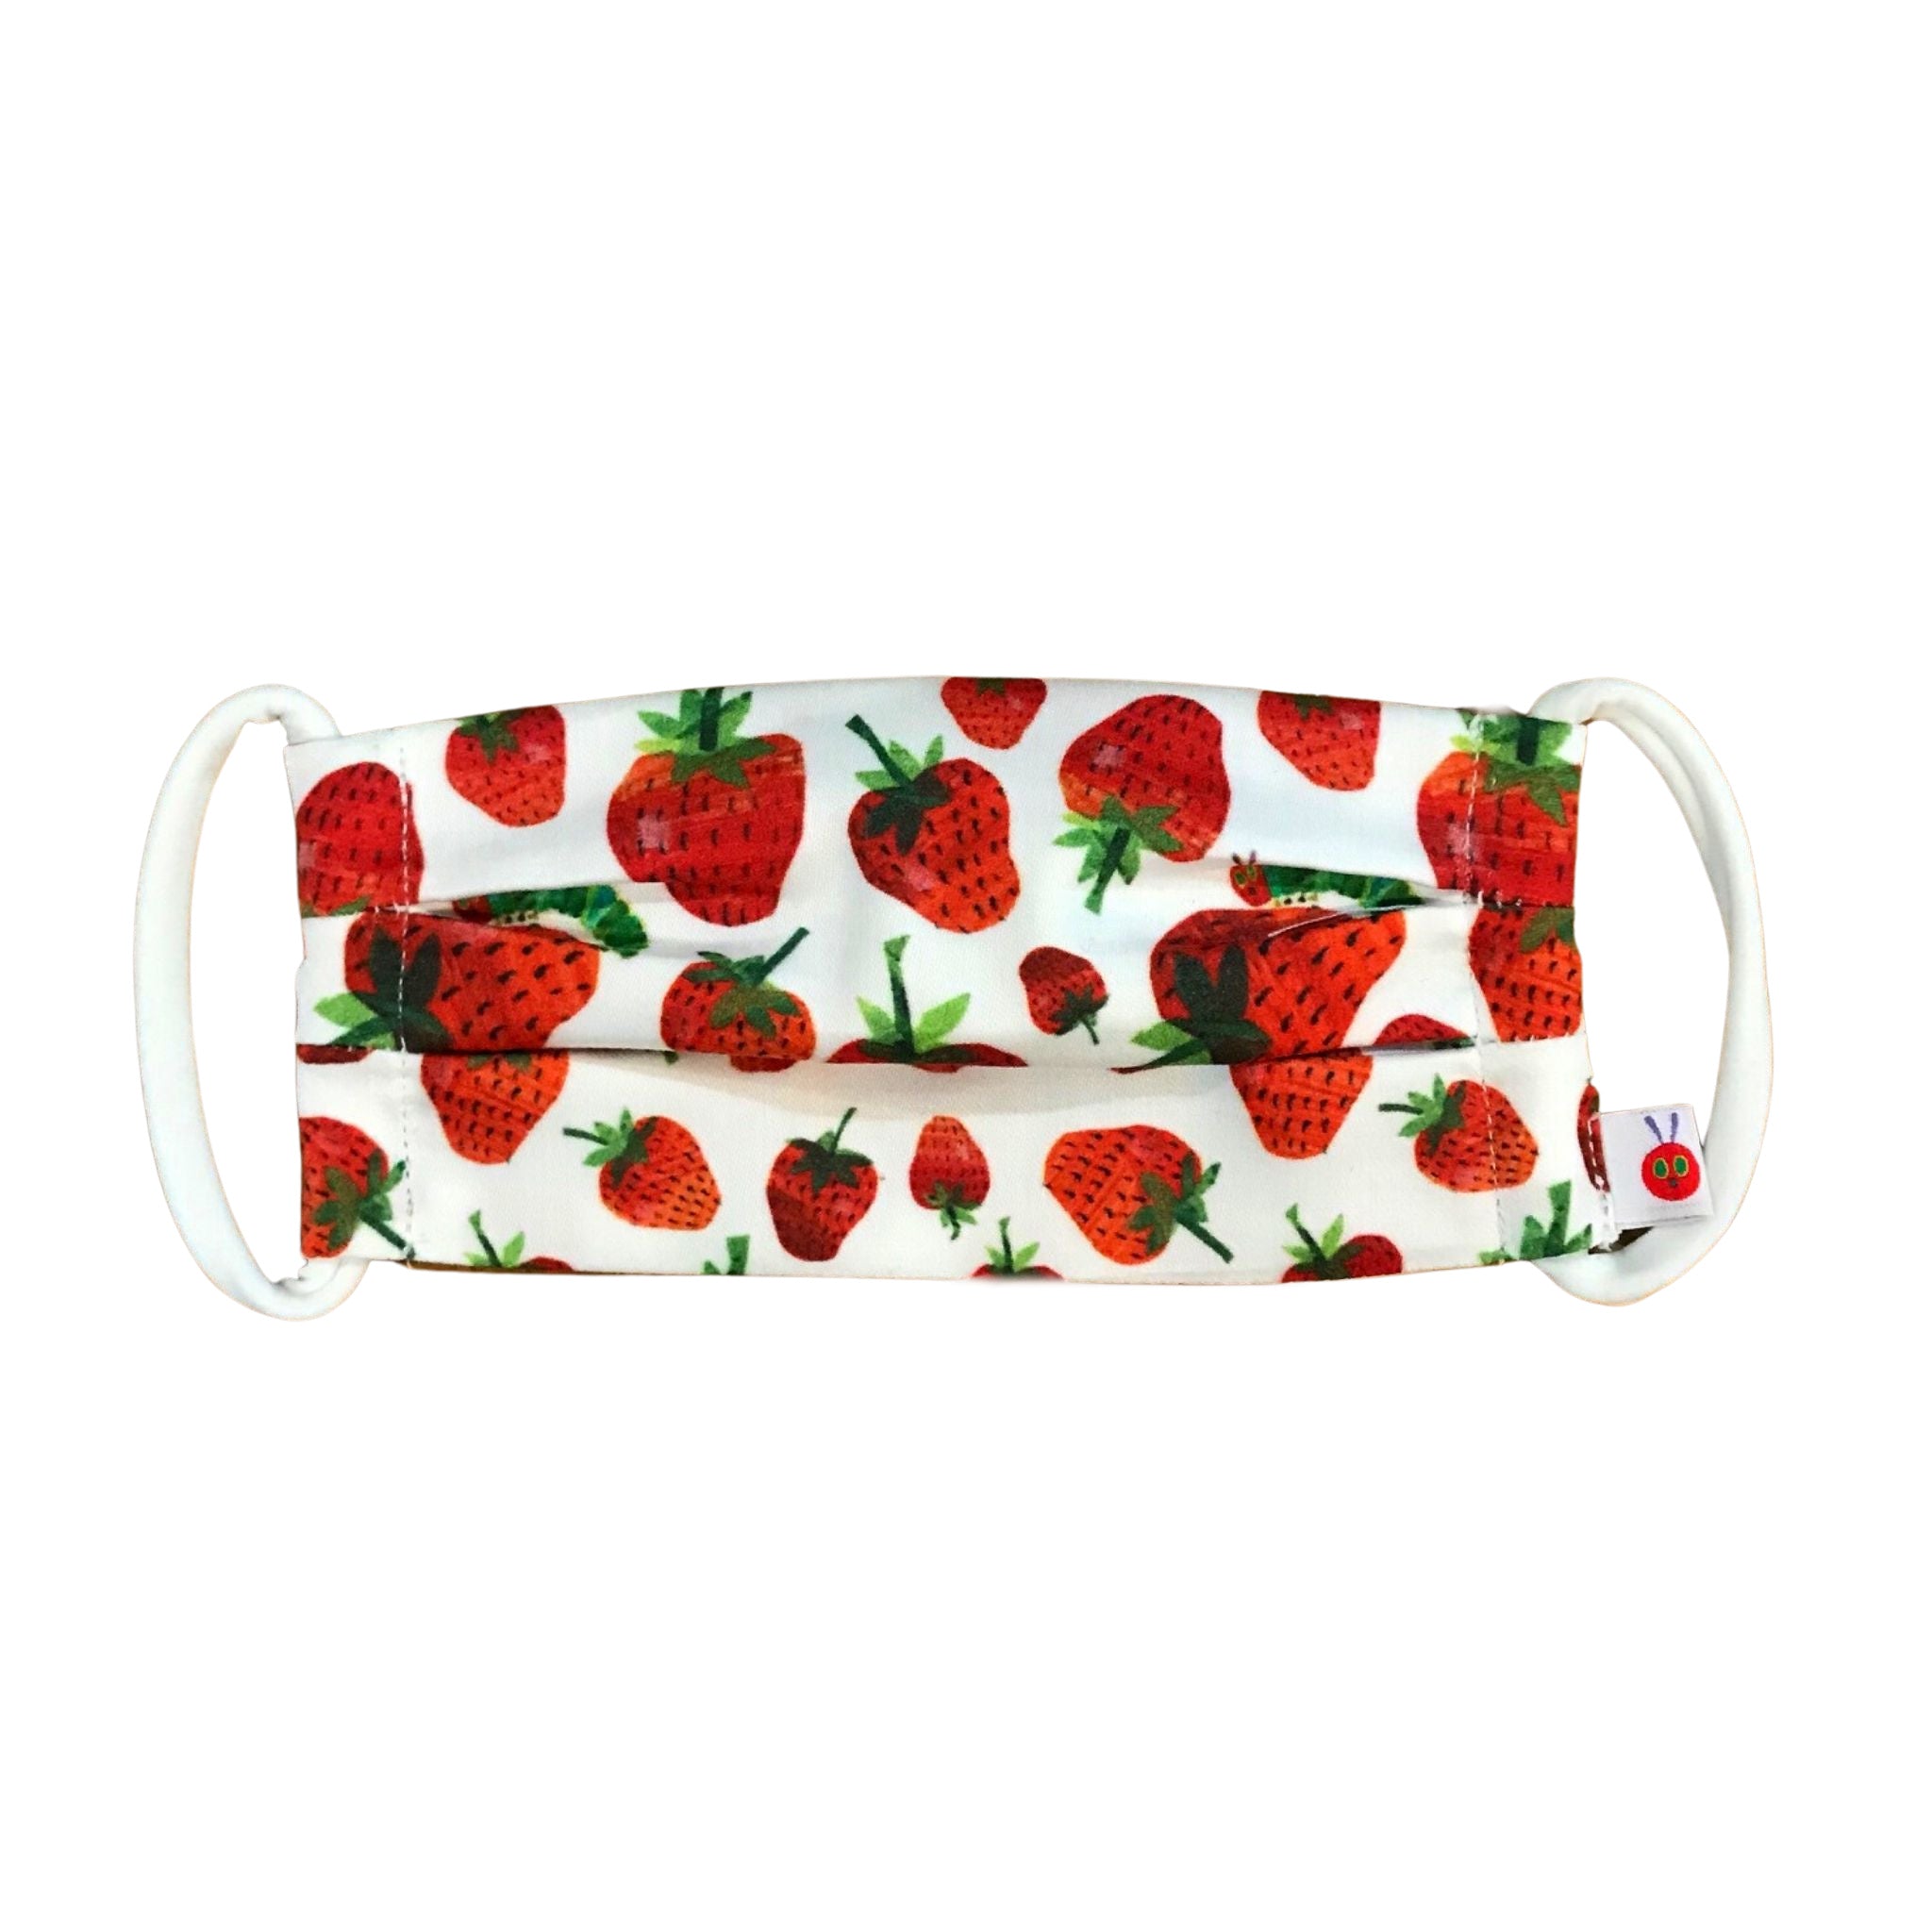 Very Hungry Caterpillar  Cotton Mask in World of Eric Carle  Strawberries Print